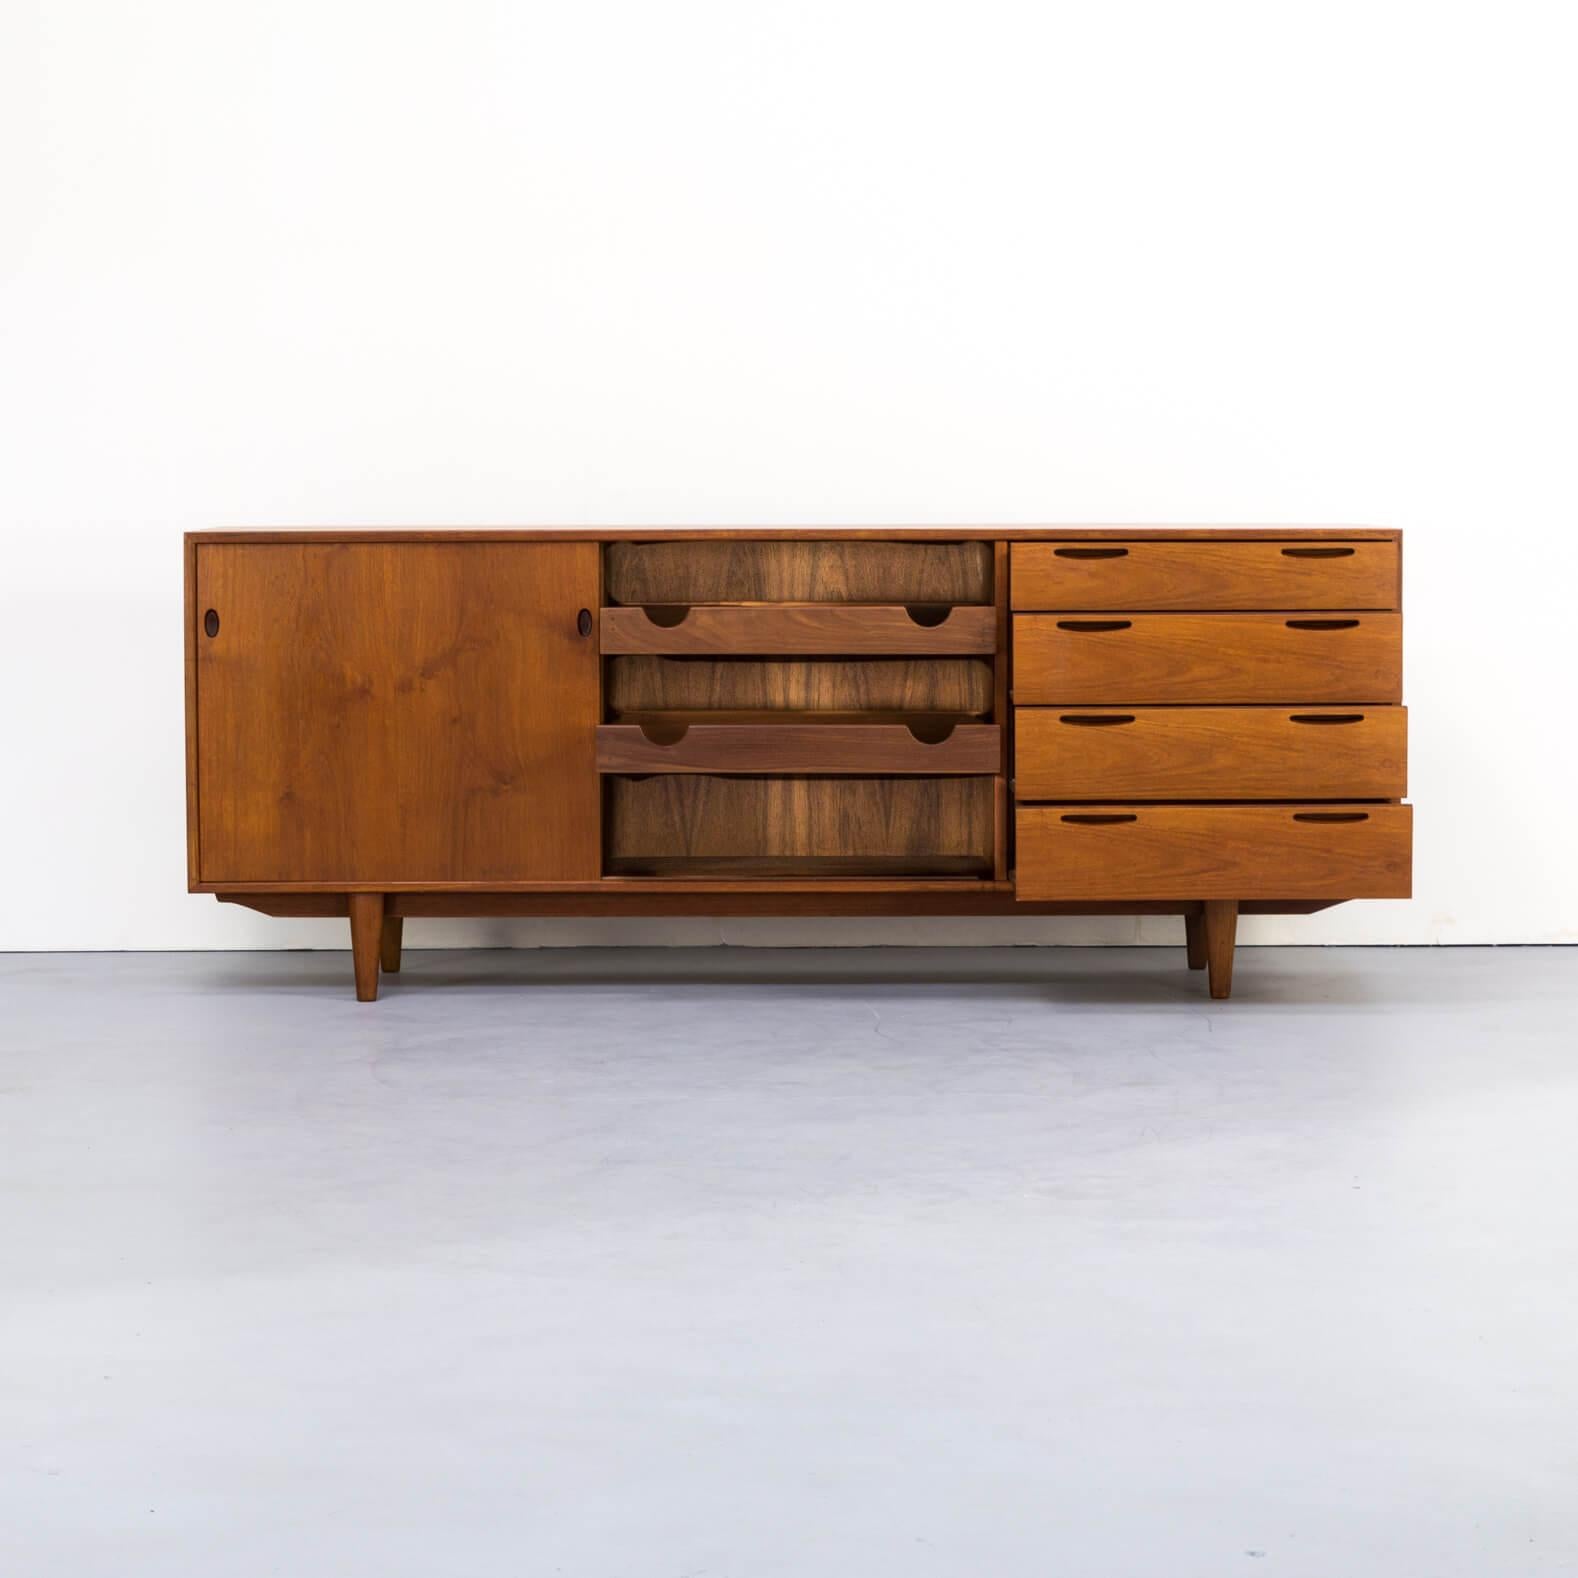 1960s teak sideboard by Ib Kofod-Larsen. This beautiful piece of furniture has an impressive teak wood corpus, that is framed with darker teak on the corpus’ edges. All handles are elegantly worked out and give this sideboard its distinguished look.